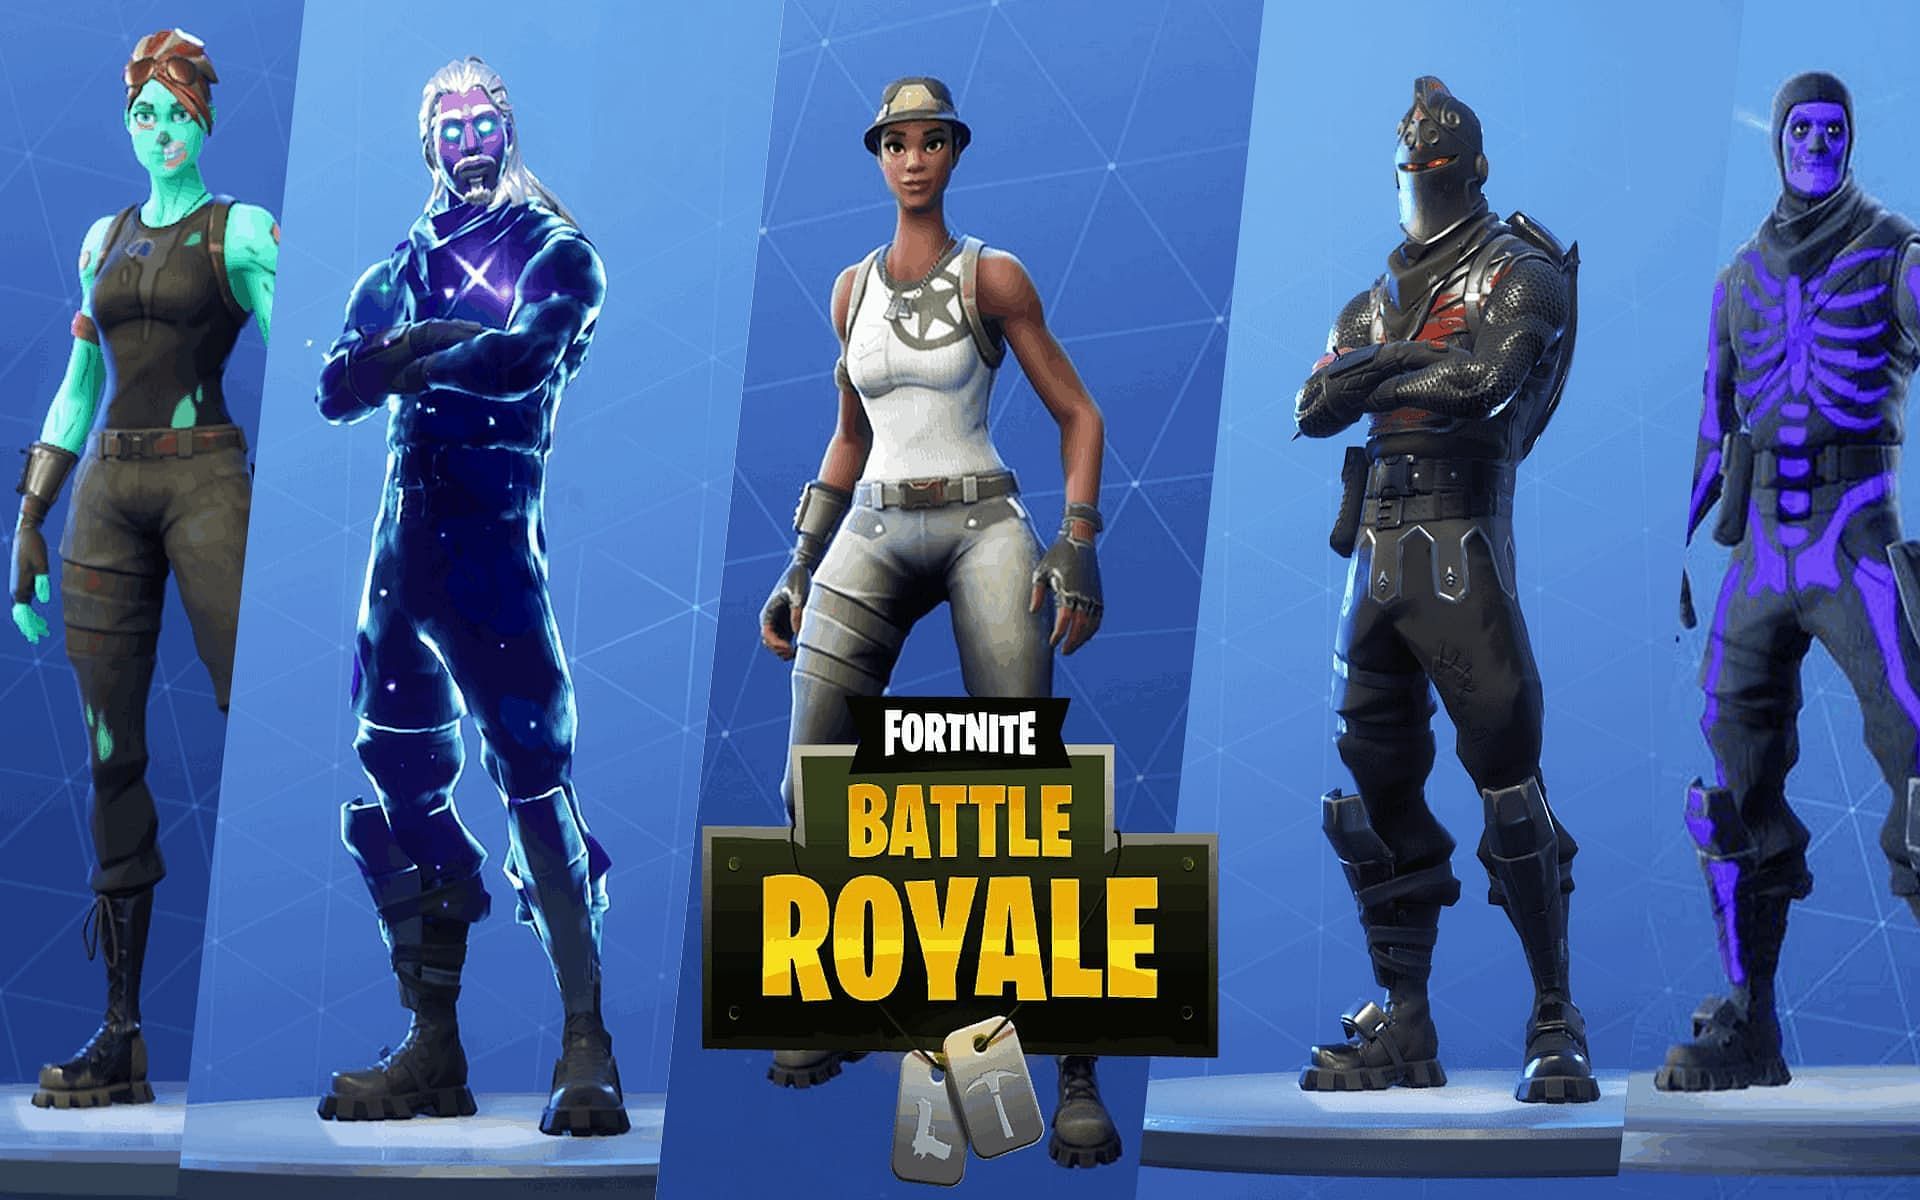 Fortnite Skins: The best and rarest skins in the game